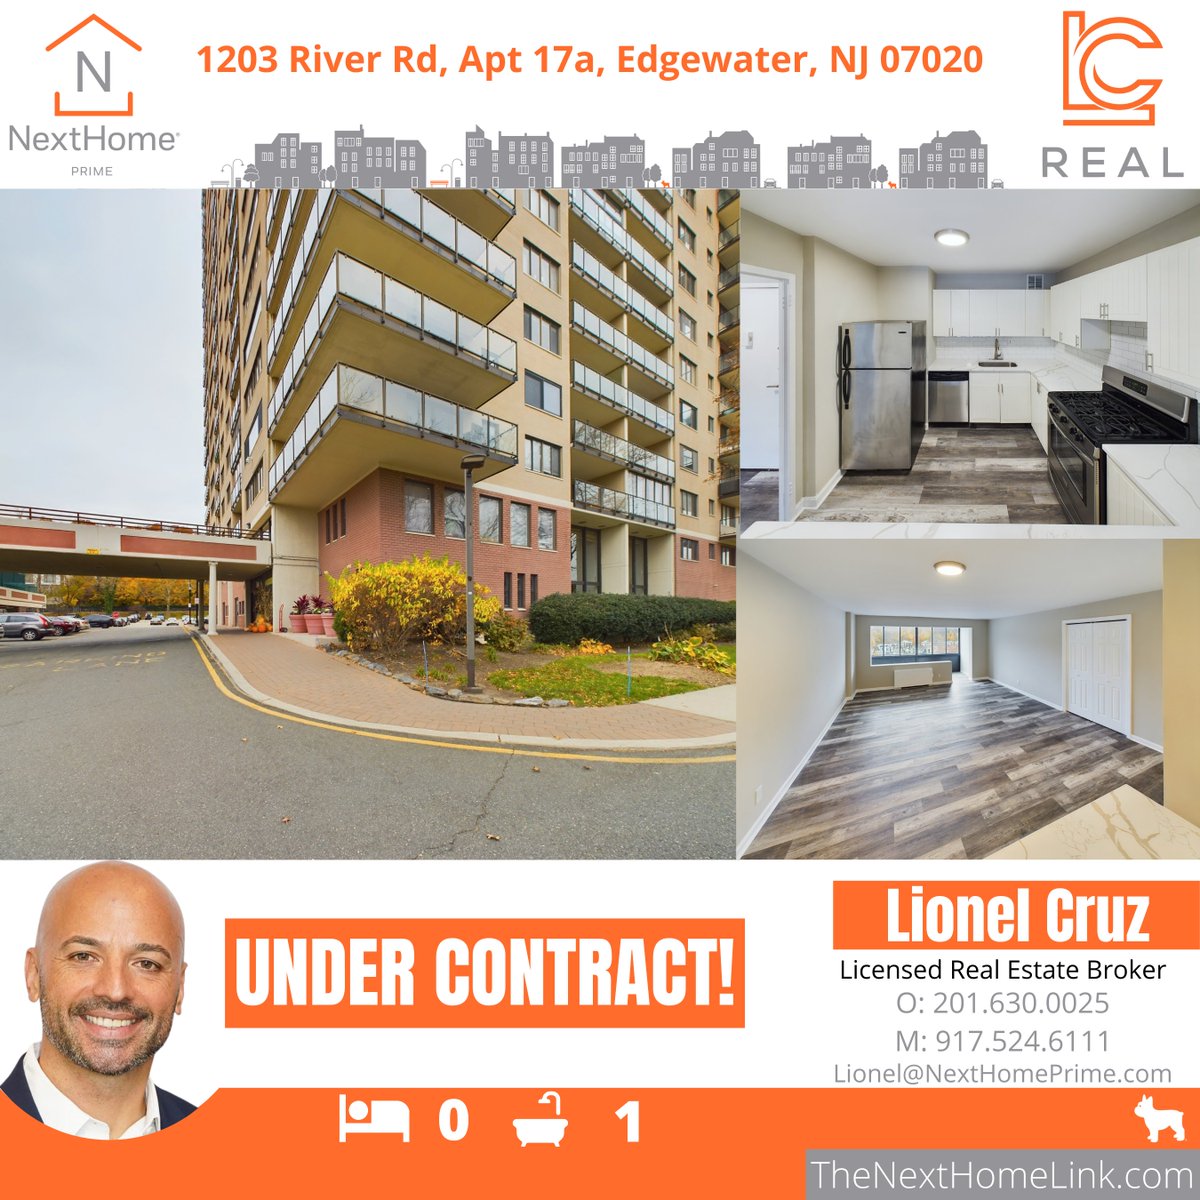 We are now UNDER CONTRACT at 1203 River Rd Apt 17a, Edgewater, NJ!

#NextHomePrime #NextHome #UnderContract #RealEstate #Realtor #Market #WhosNext #NewJersey #NJ #home #ListingAgent #condo #ForSale #RealEstateForSale #homesforsale #LionelCruz #LCReal #Residential #apartments